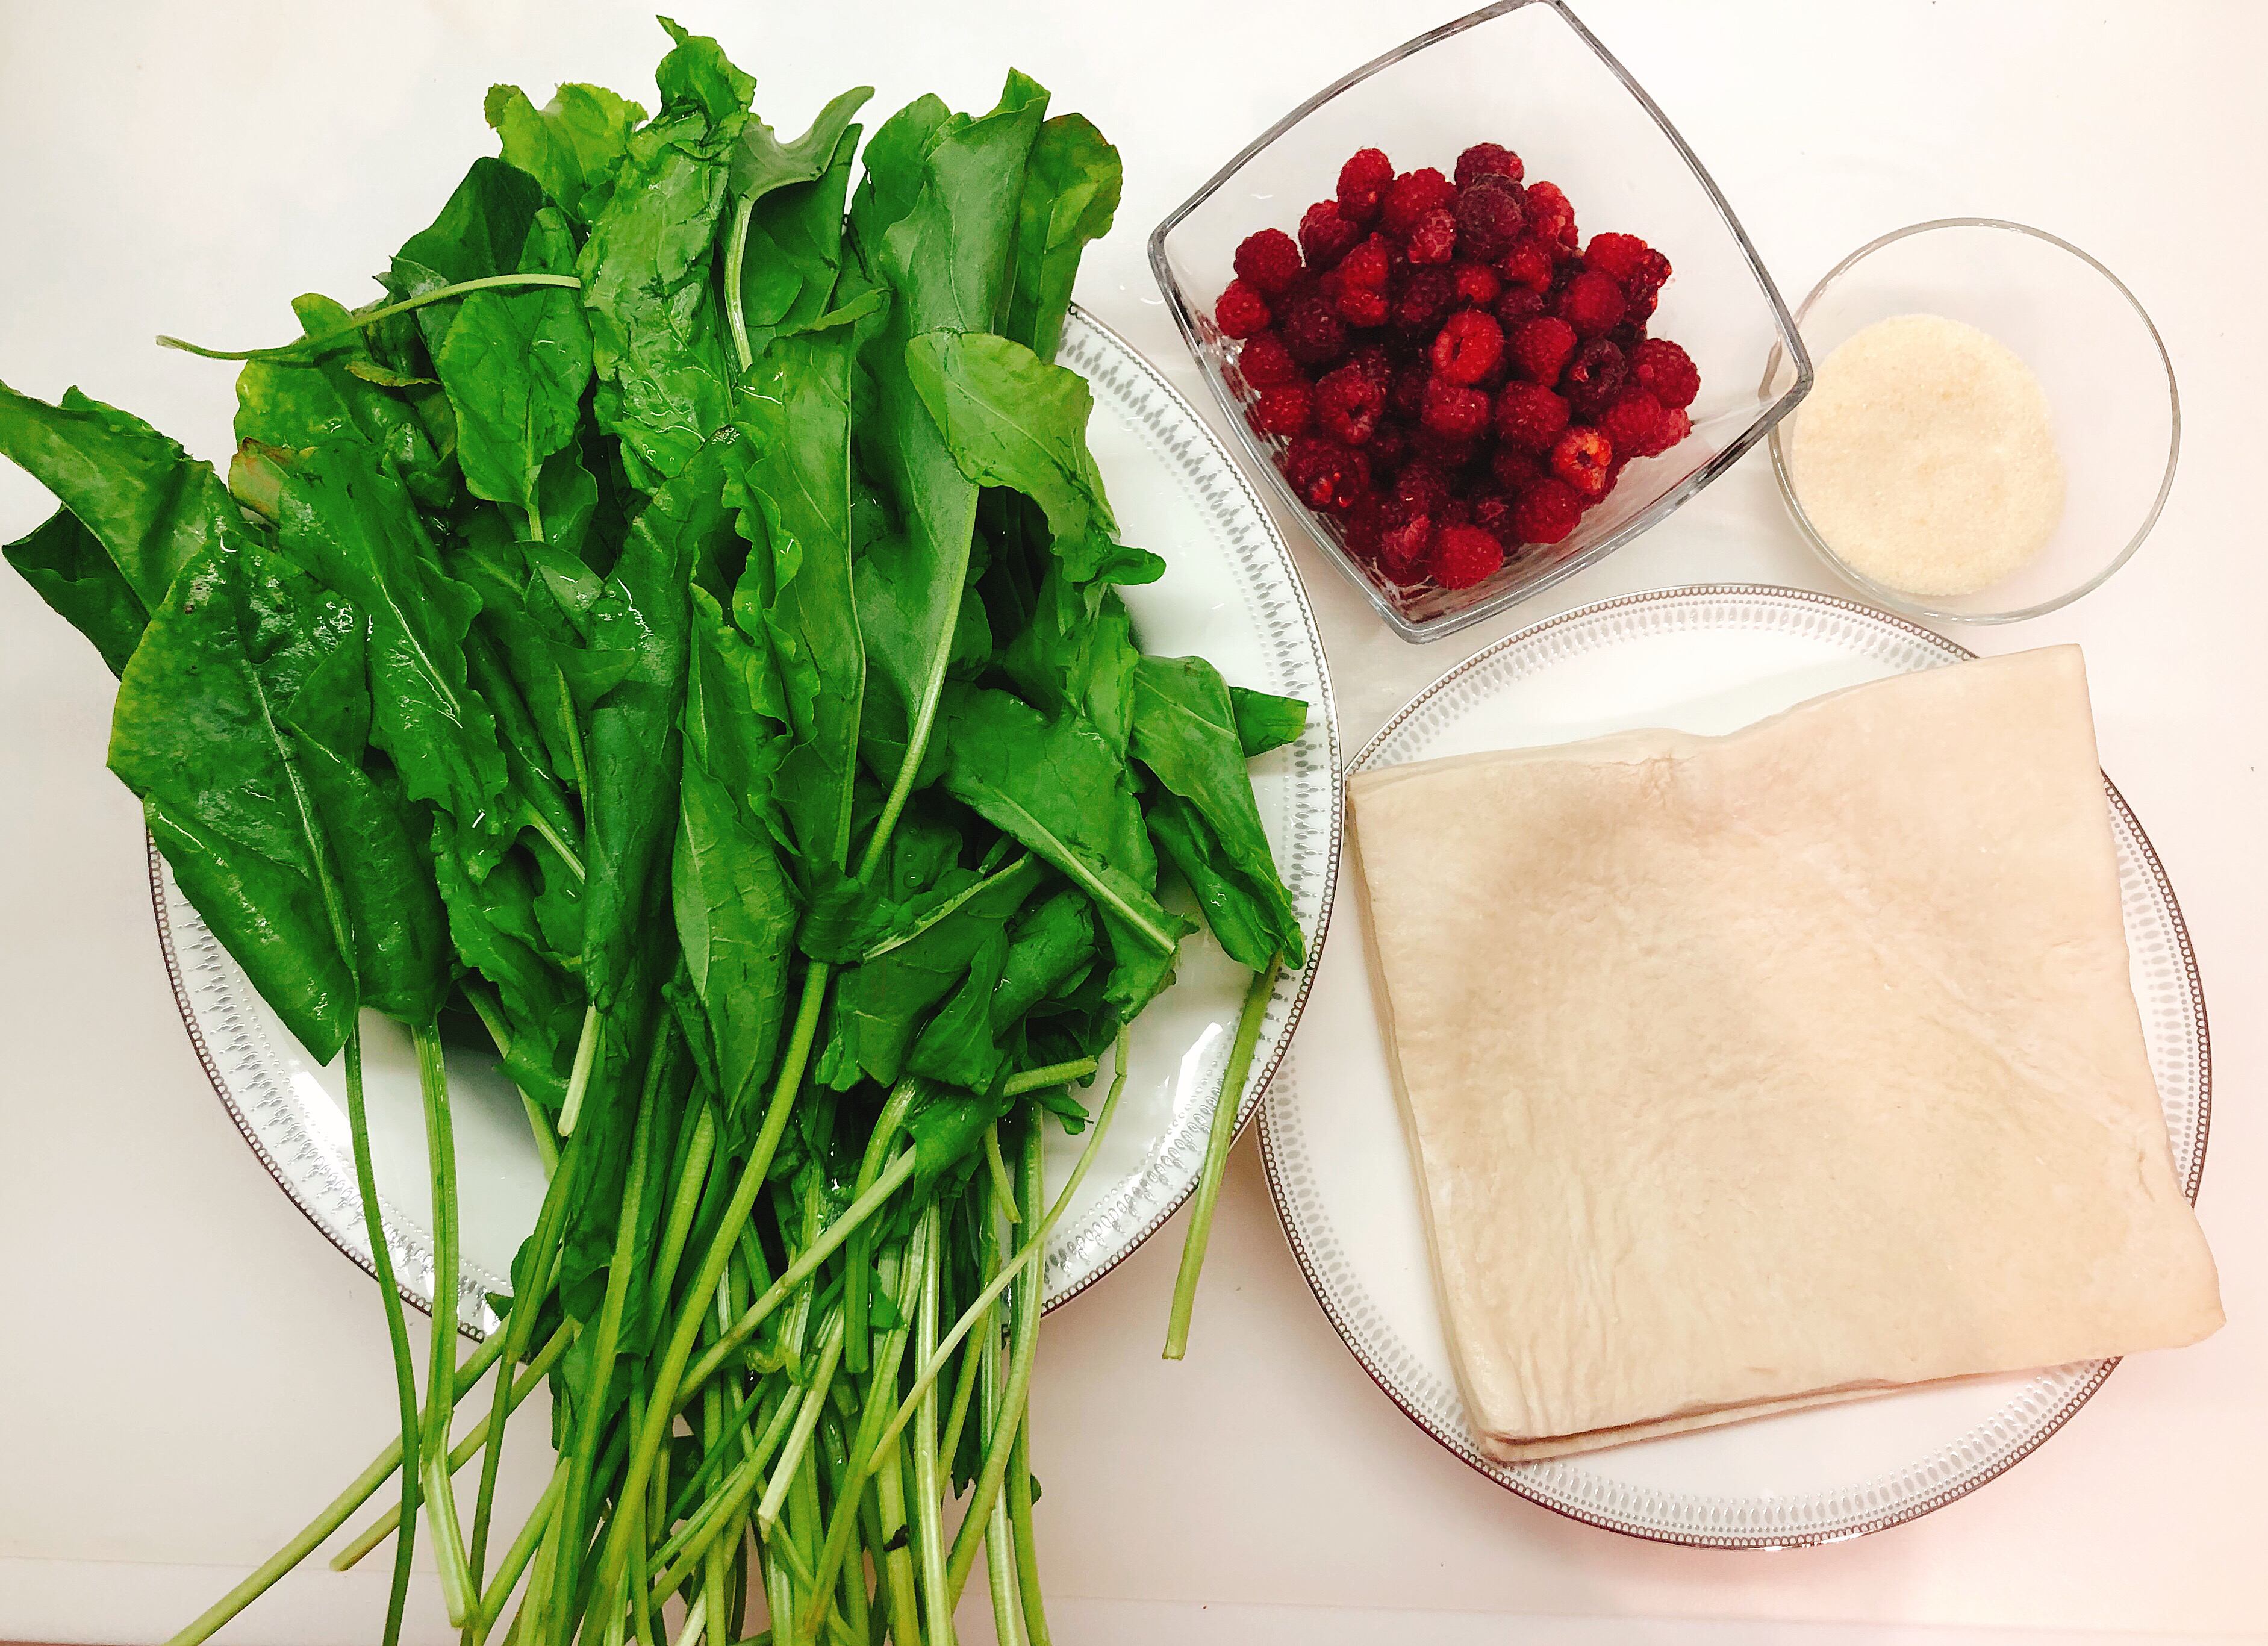 Ingredients for pie with sorrel and raspberries